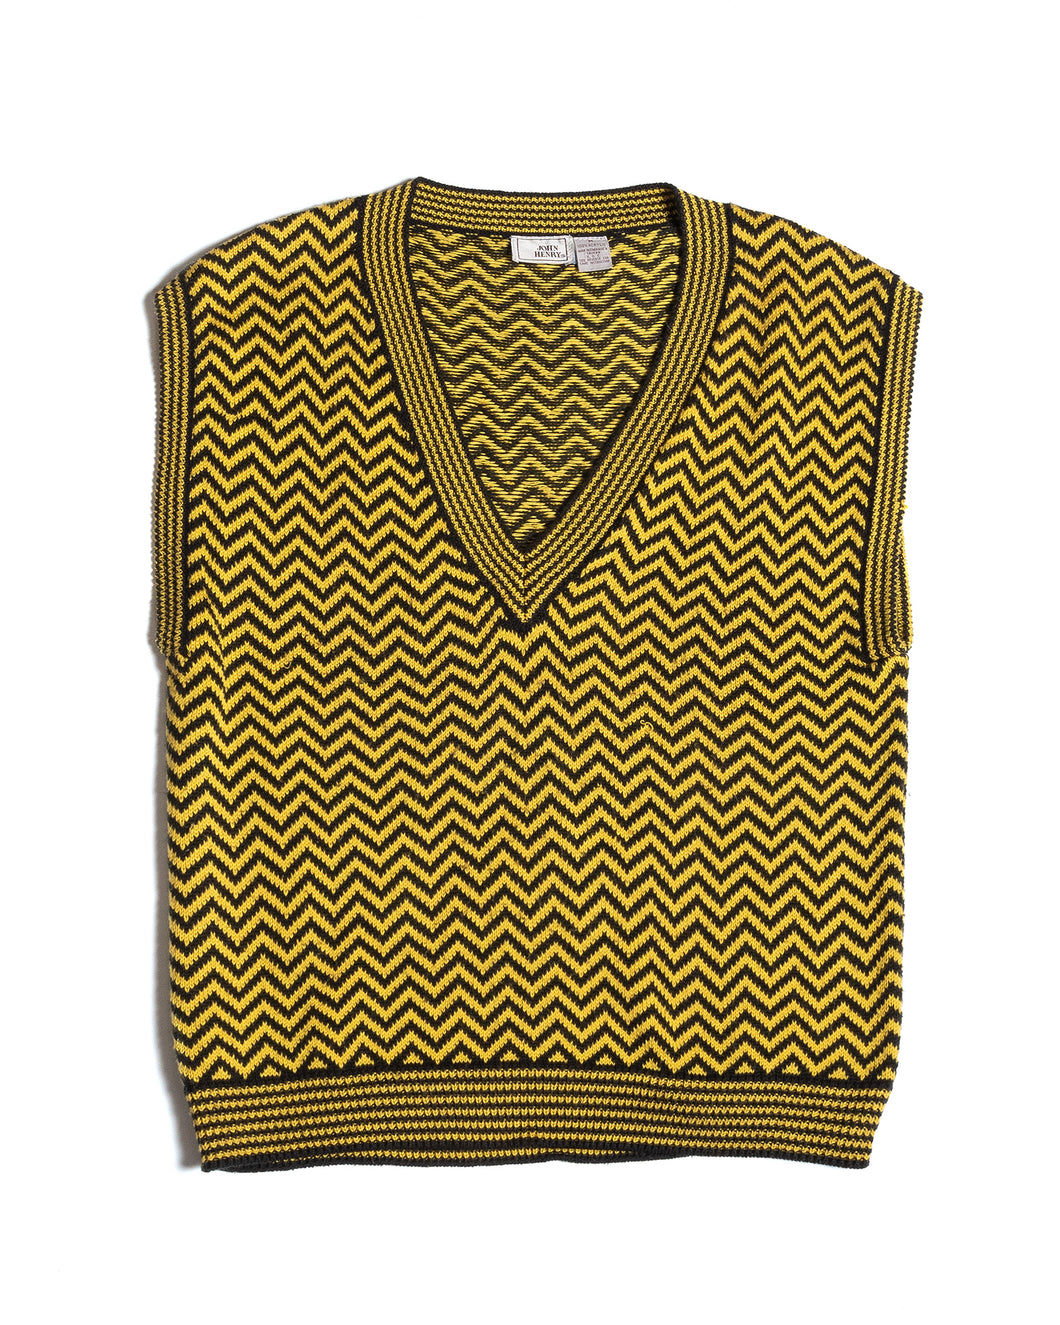 80s Yellow and Black Chevron Knit Sweater Vest